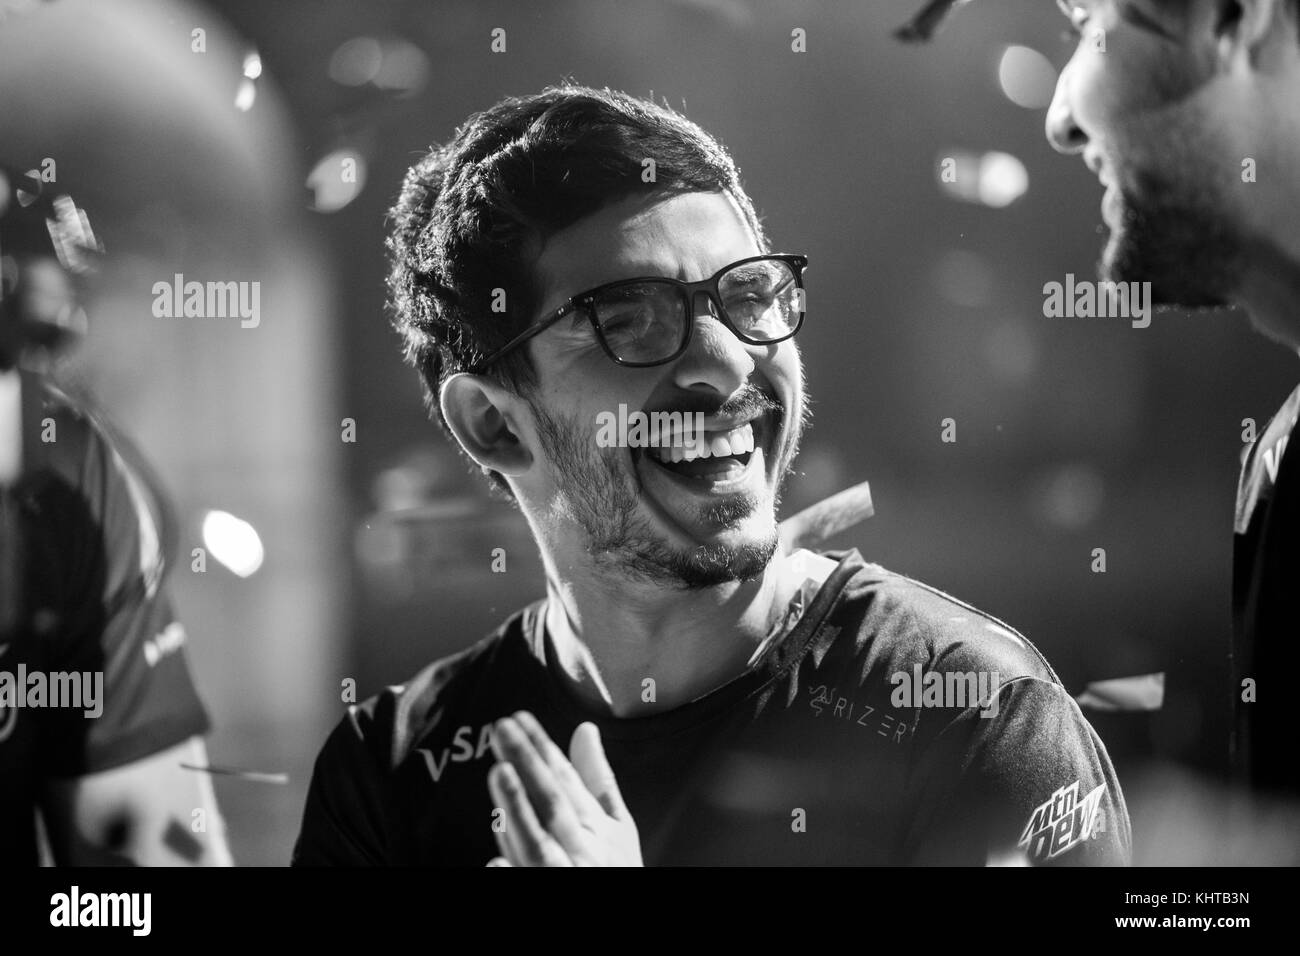 SAINT PETERSBURG, RUSSIA - OCTOBER 29 2017: EPICENTER Counter Strike: Global Offensive cyber sport event. Most valuable player MVP of the grand final match Marcelo coldzera David staying happy after the win Stock Photo